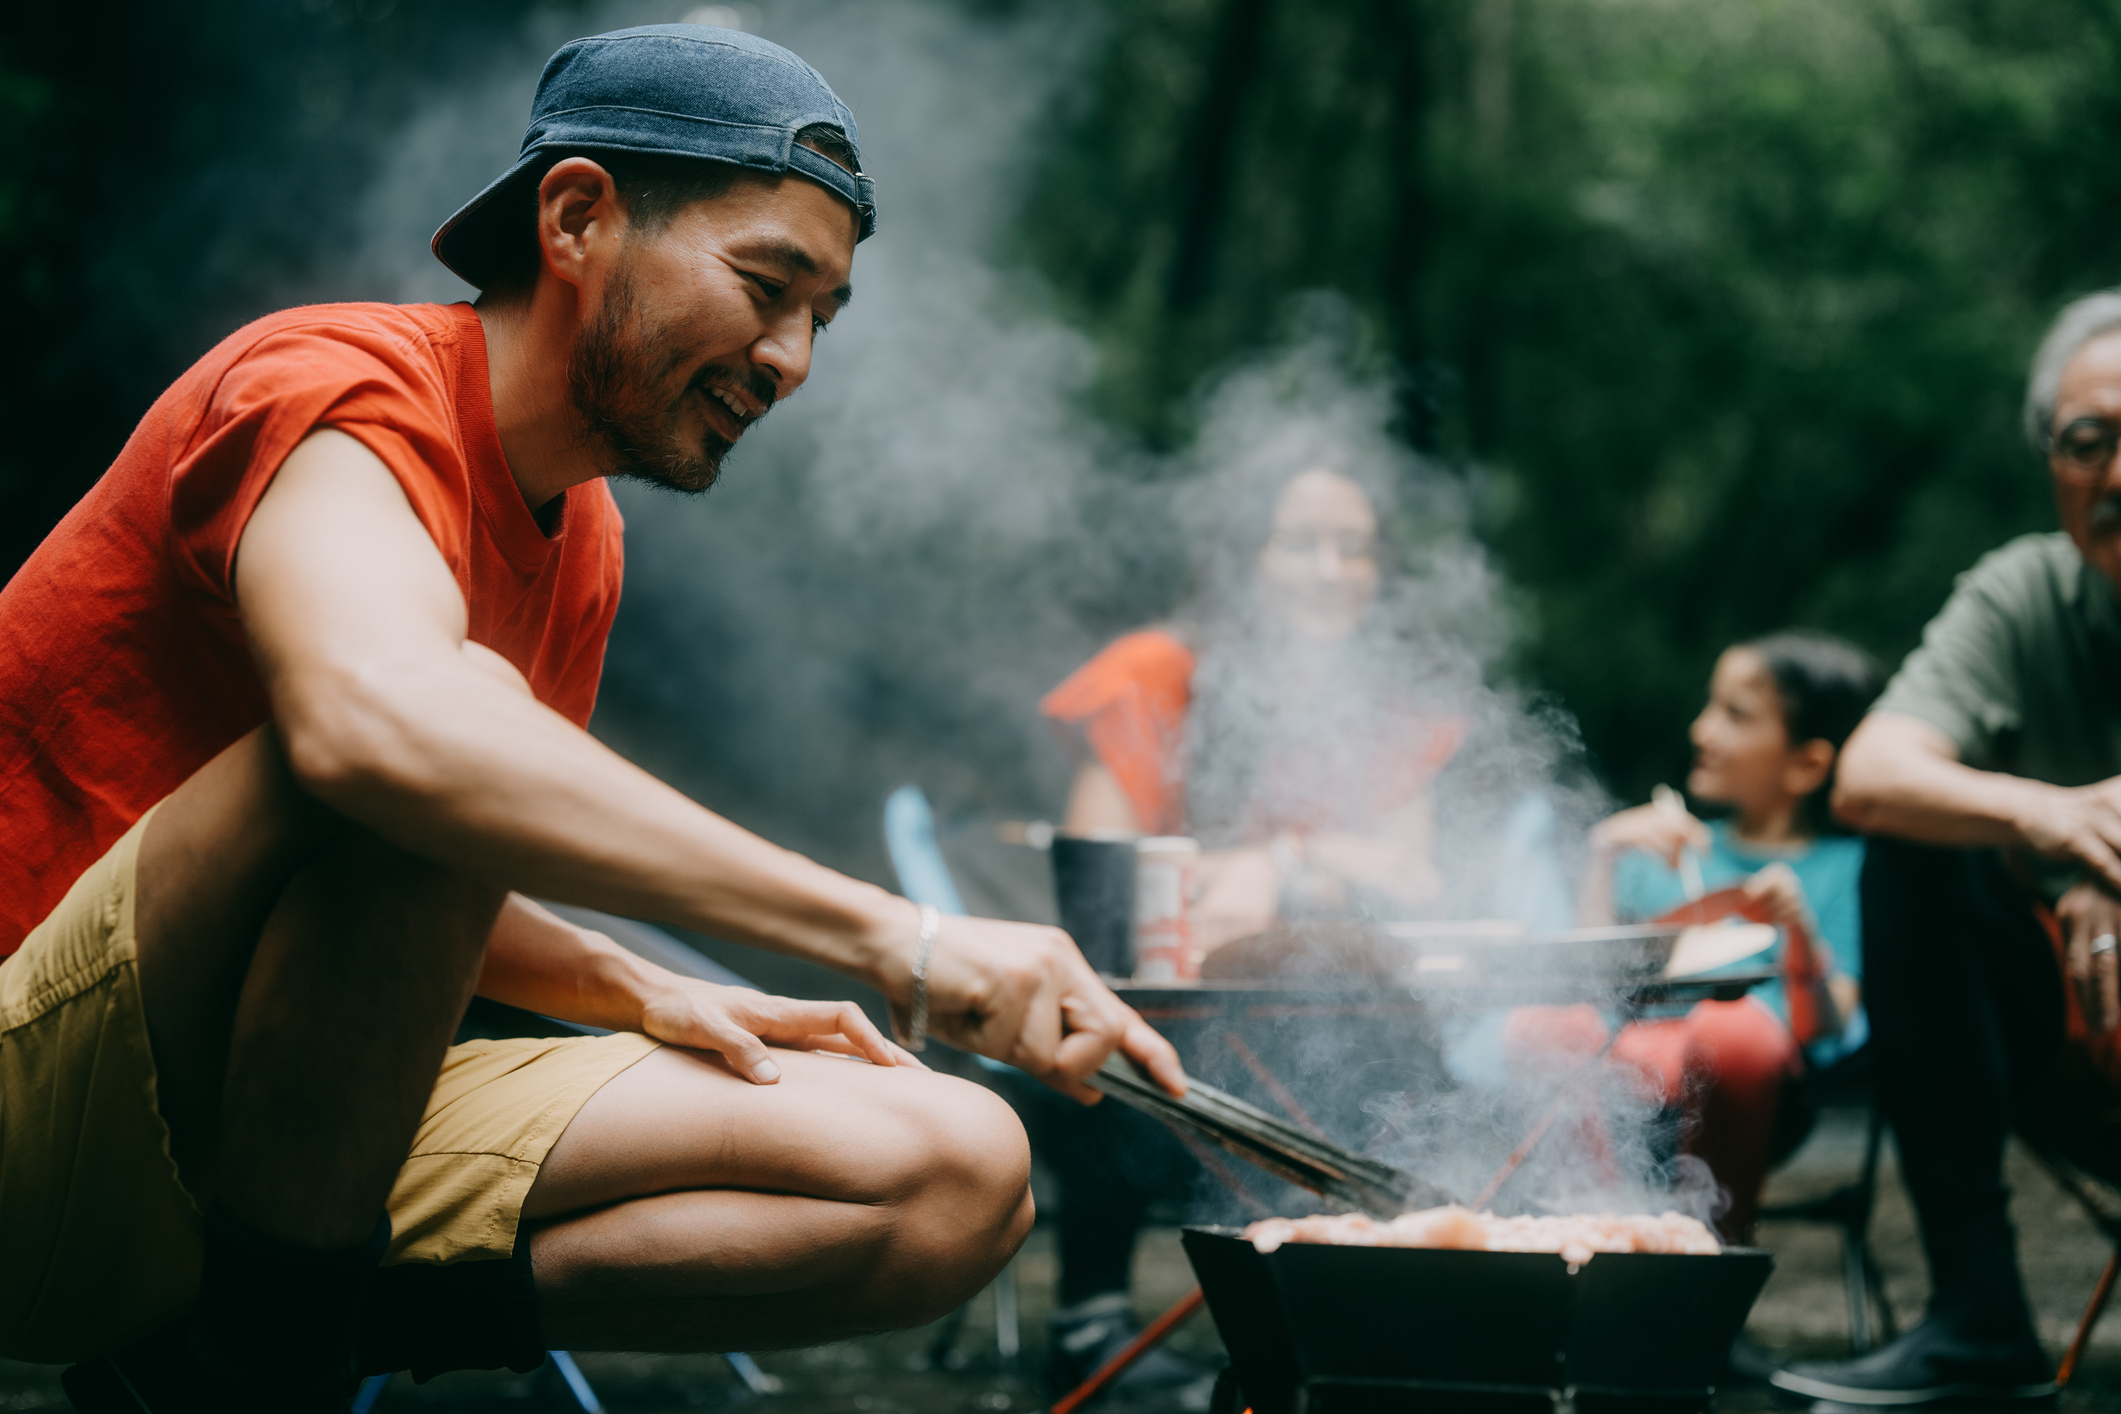 Man cooking on a grill outdoors with a group of people in a casual setting